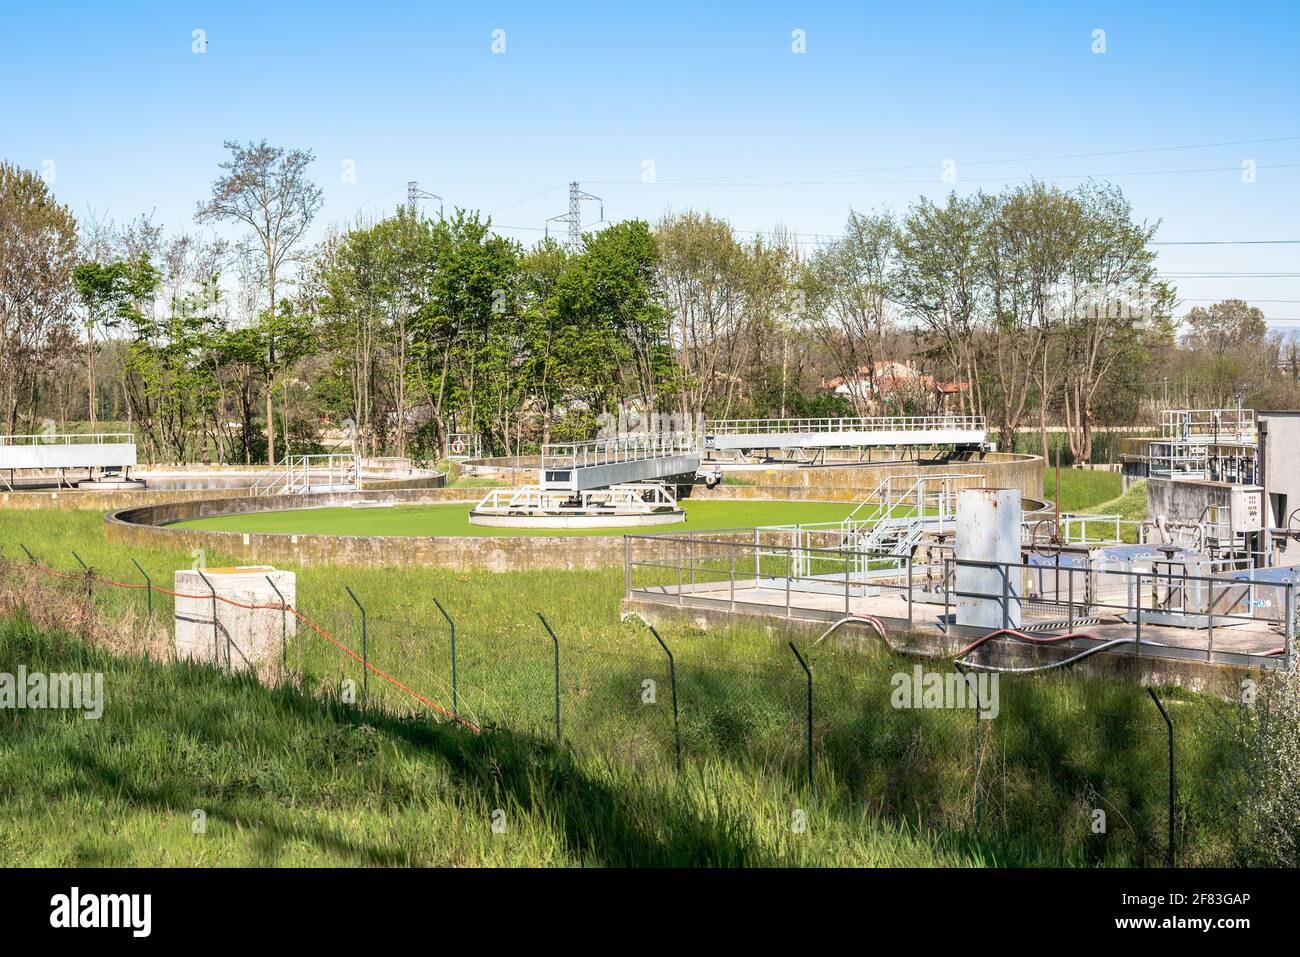 Round tanks in a wastewater treatment plant in the countryside on a clear spring morning Stock Photo